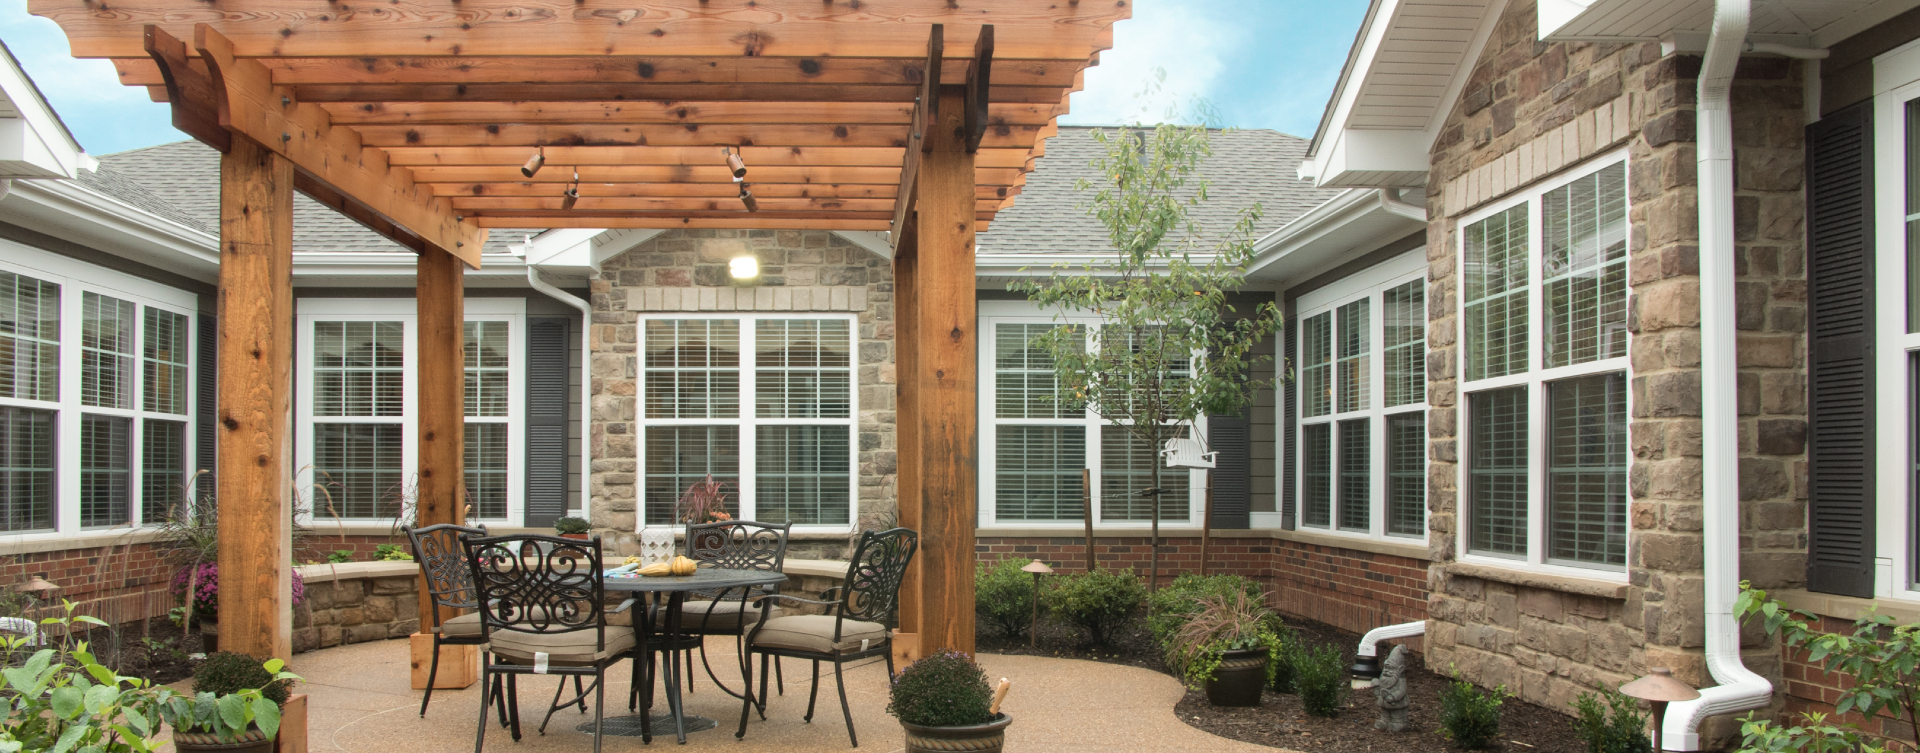 Residents with dementia can enjoy the outdoors by stepping into our secure courtyard at Bickford of Spotsylvania